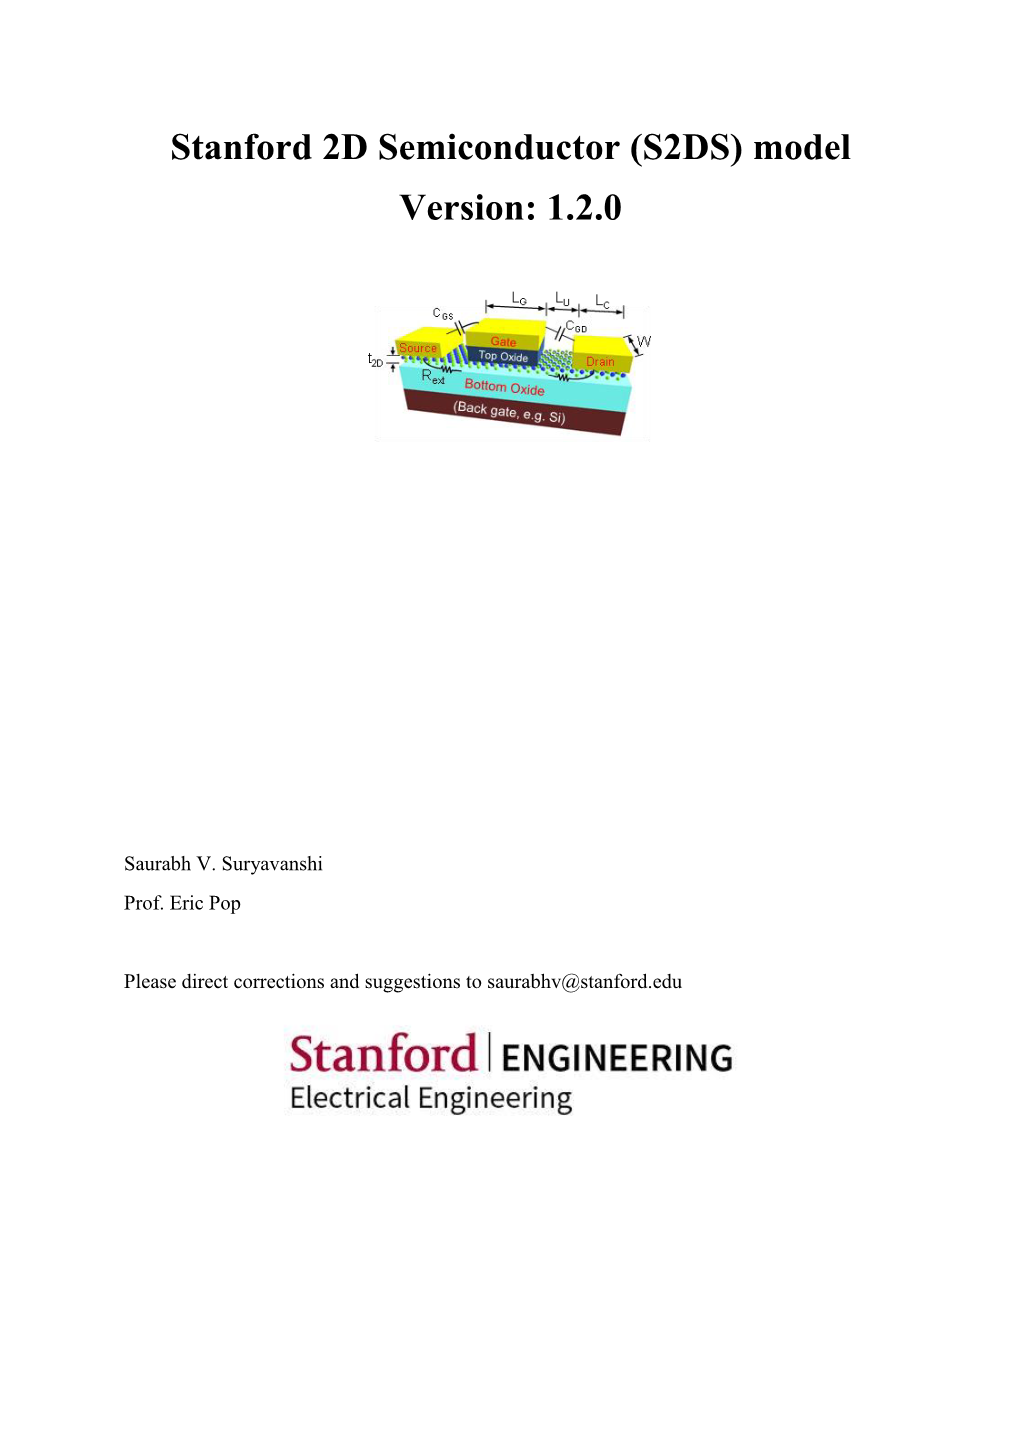 Stanford 2D Semiconductor (S2DS) Model Version: 1.2.0